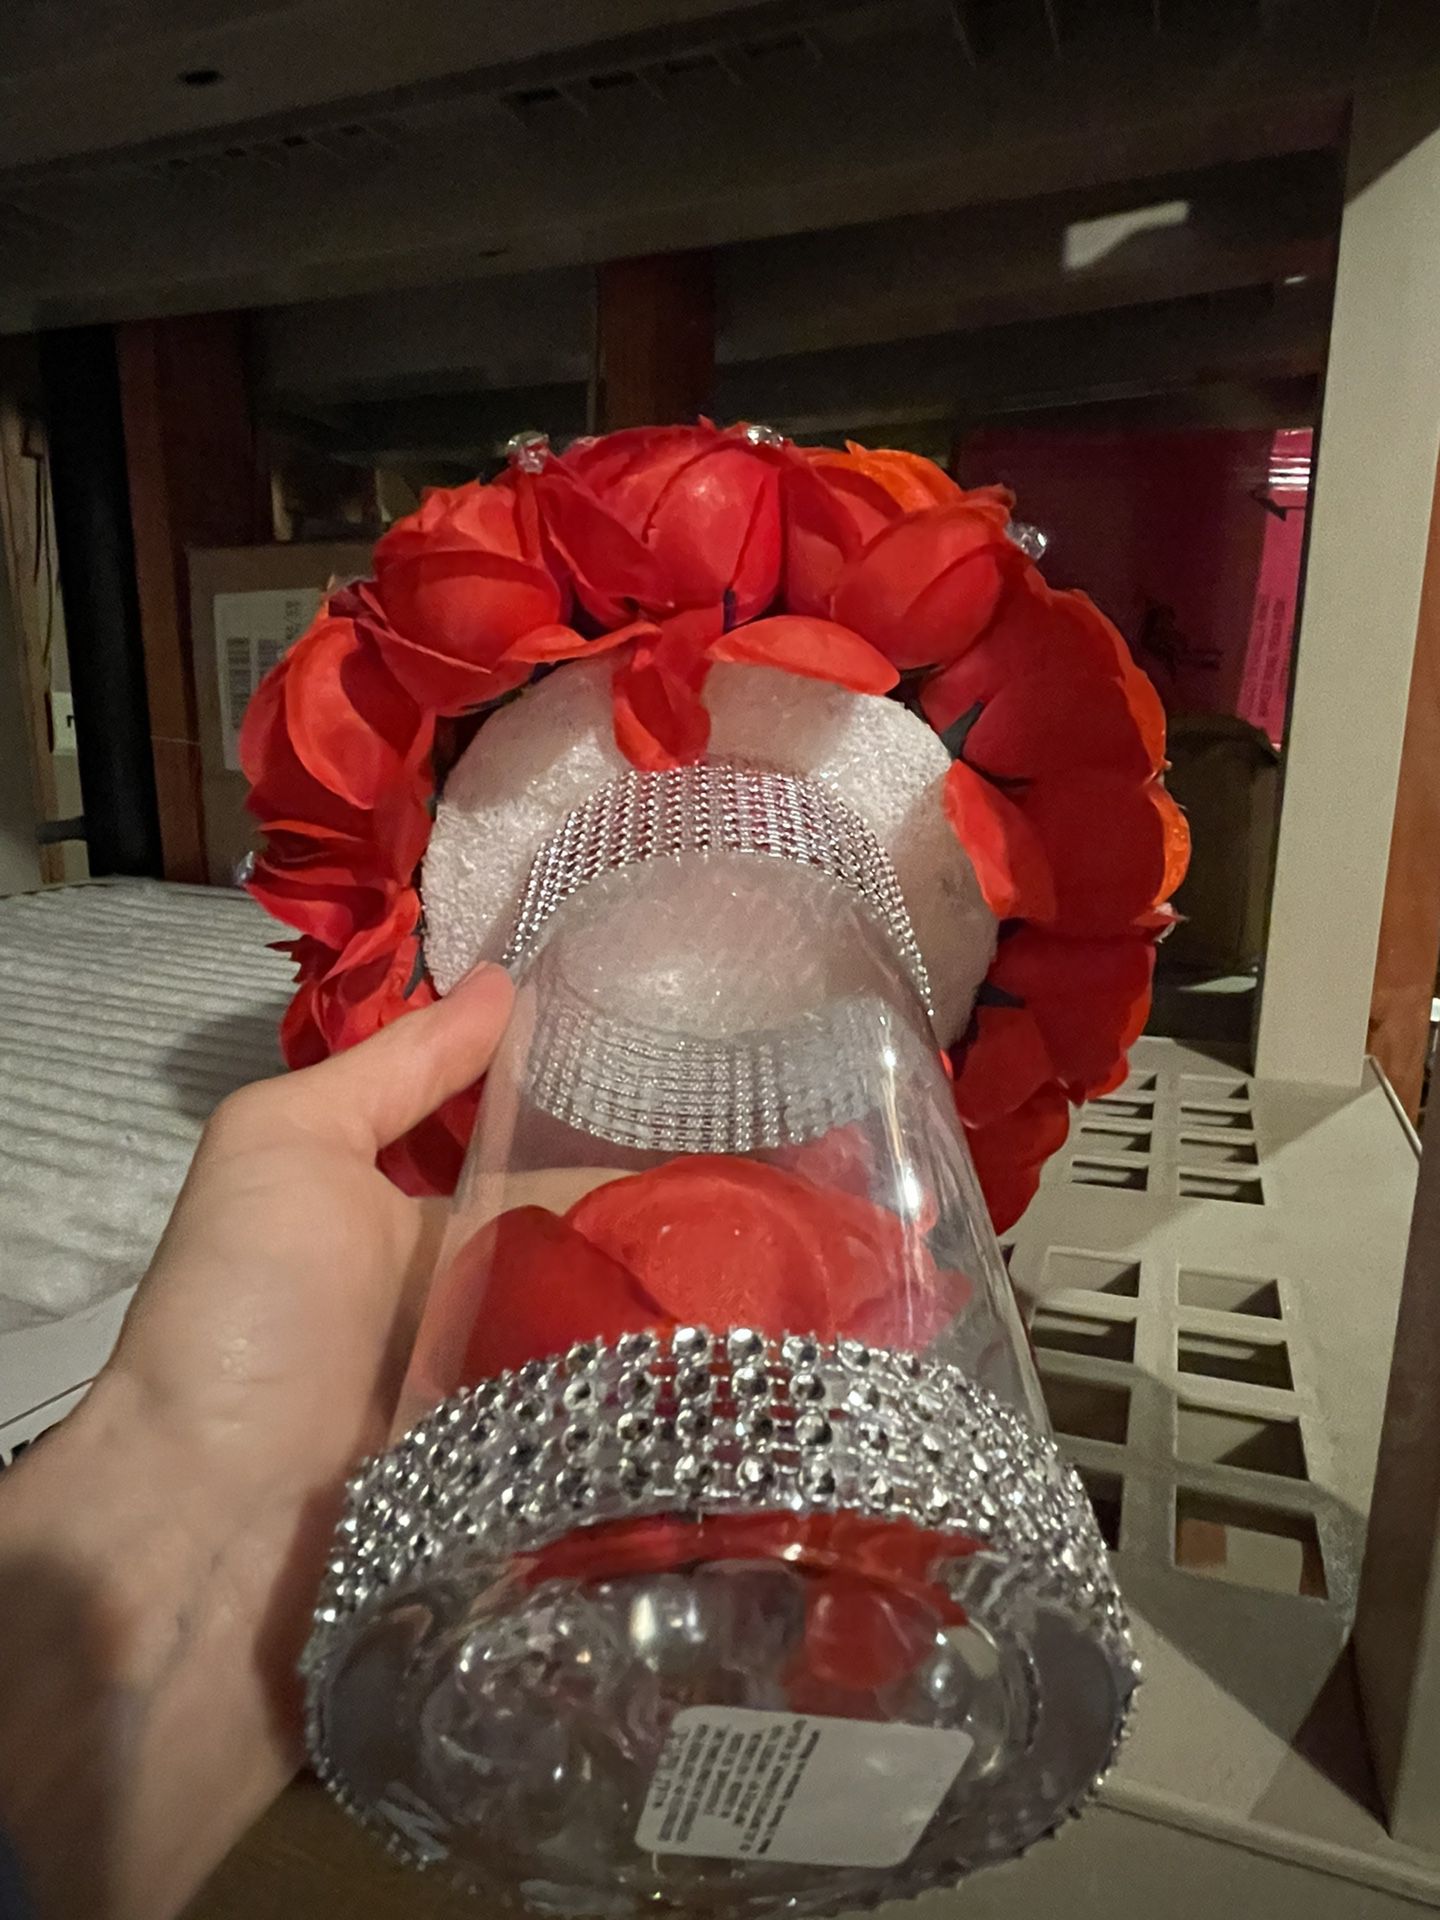 Floral Red & Crustal & Silver Centerpiece 12” Tall For Party 